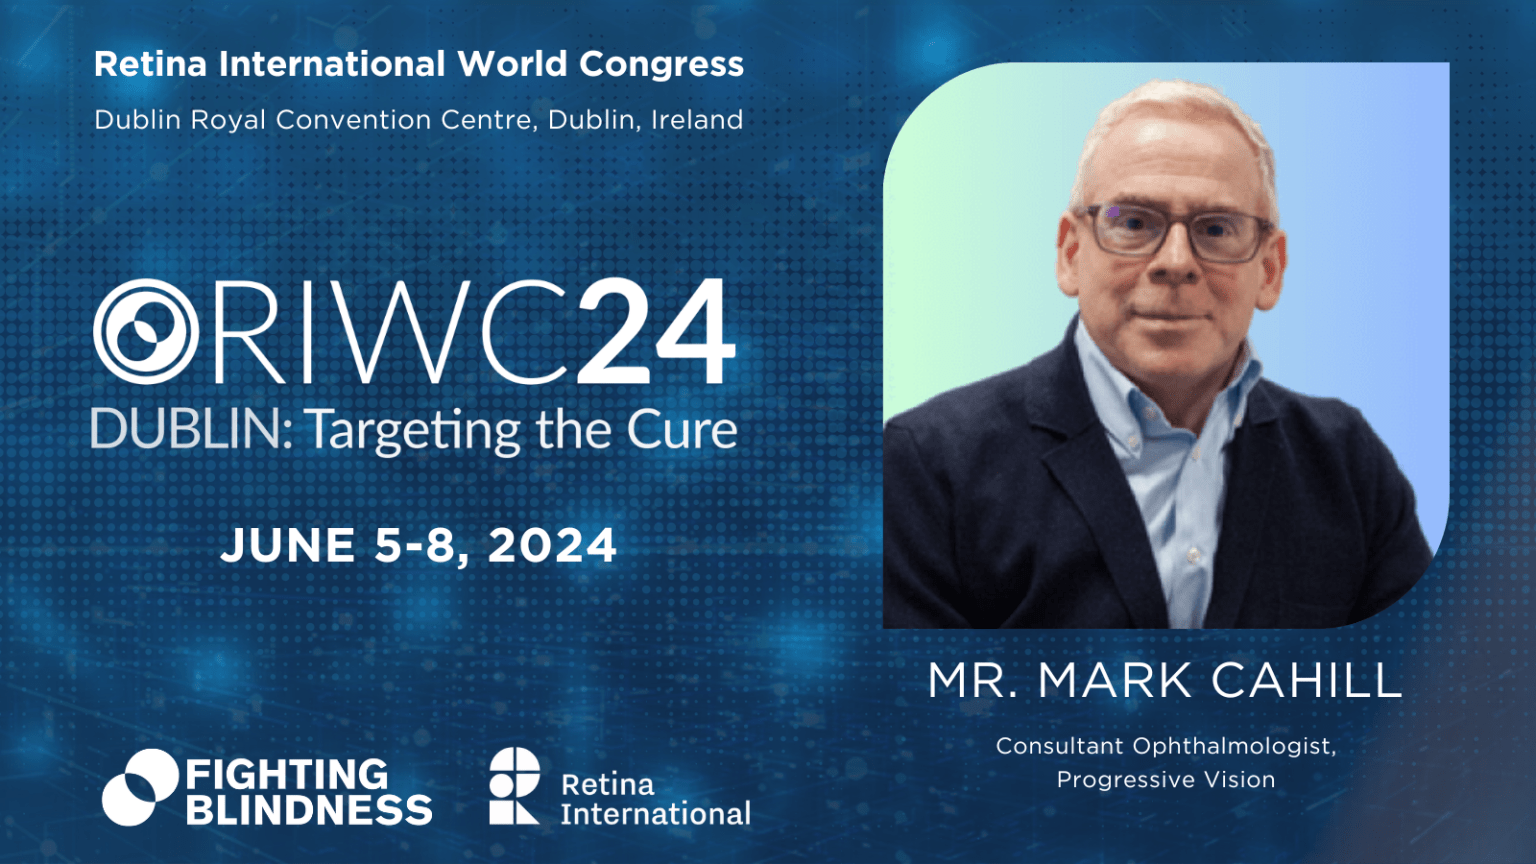 Targeting the cure for blindness at the Retina International World Congress 2024